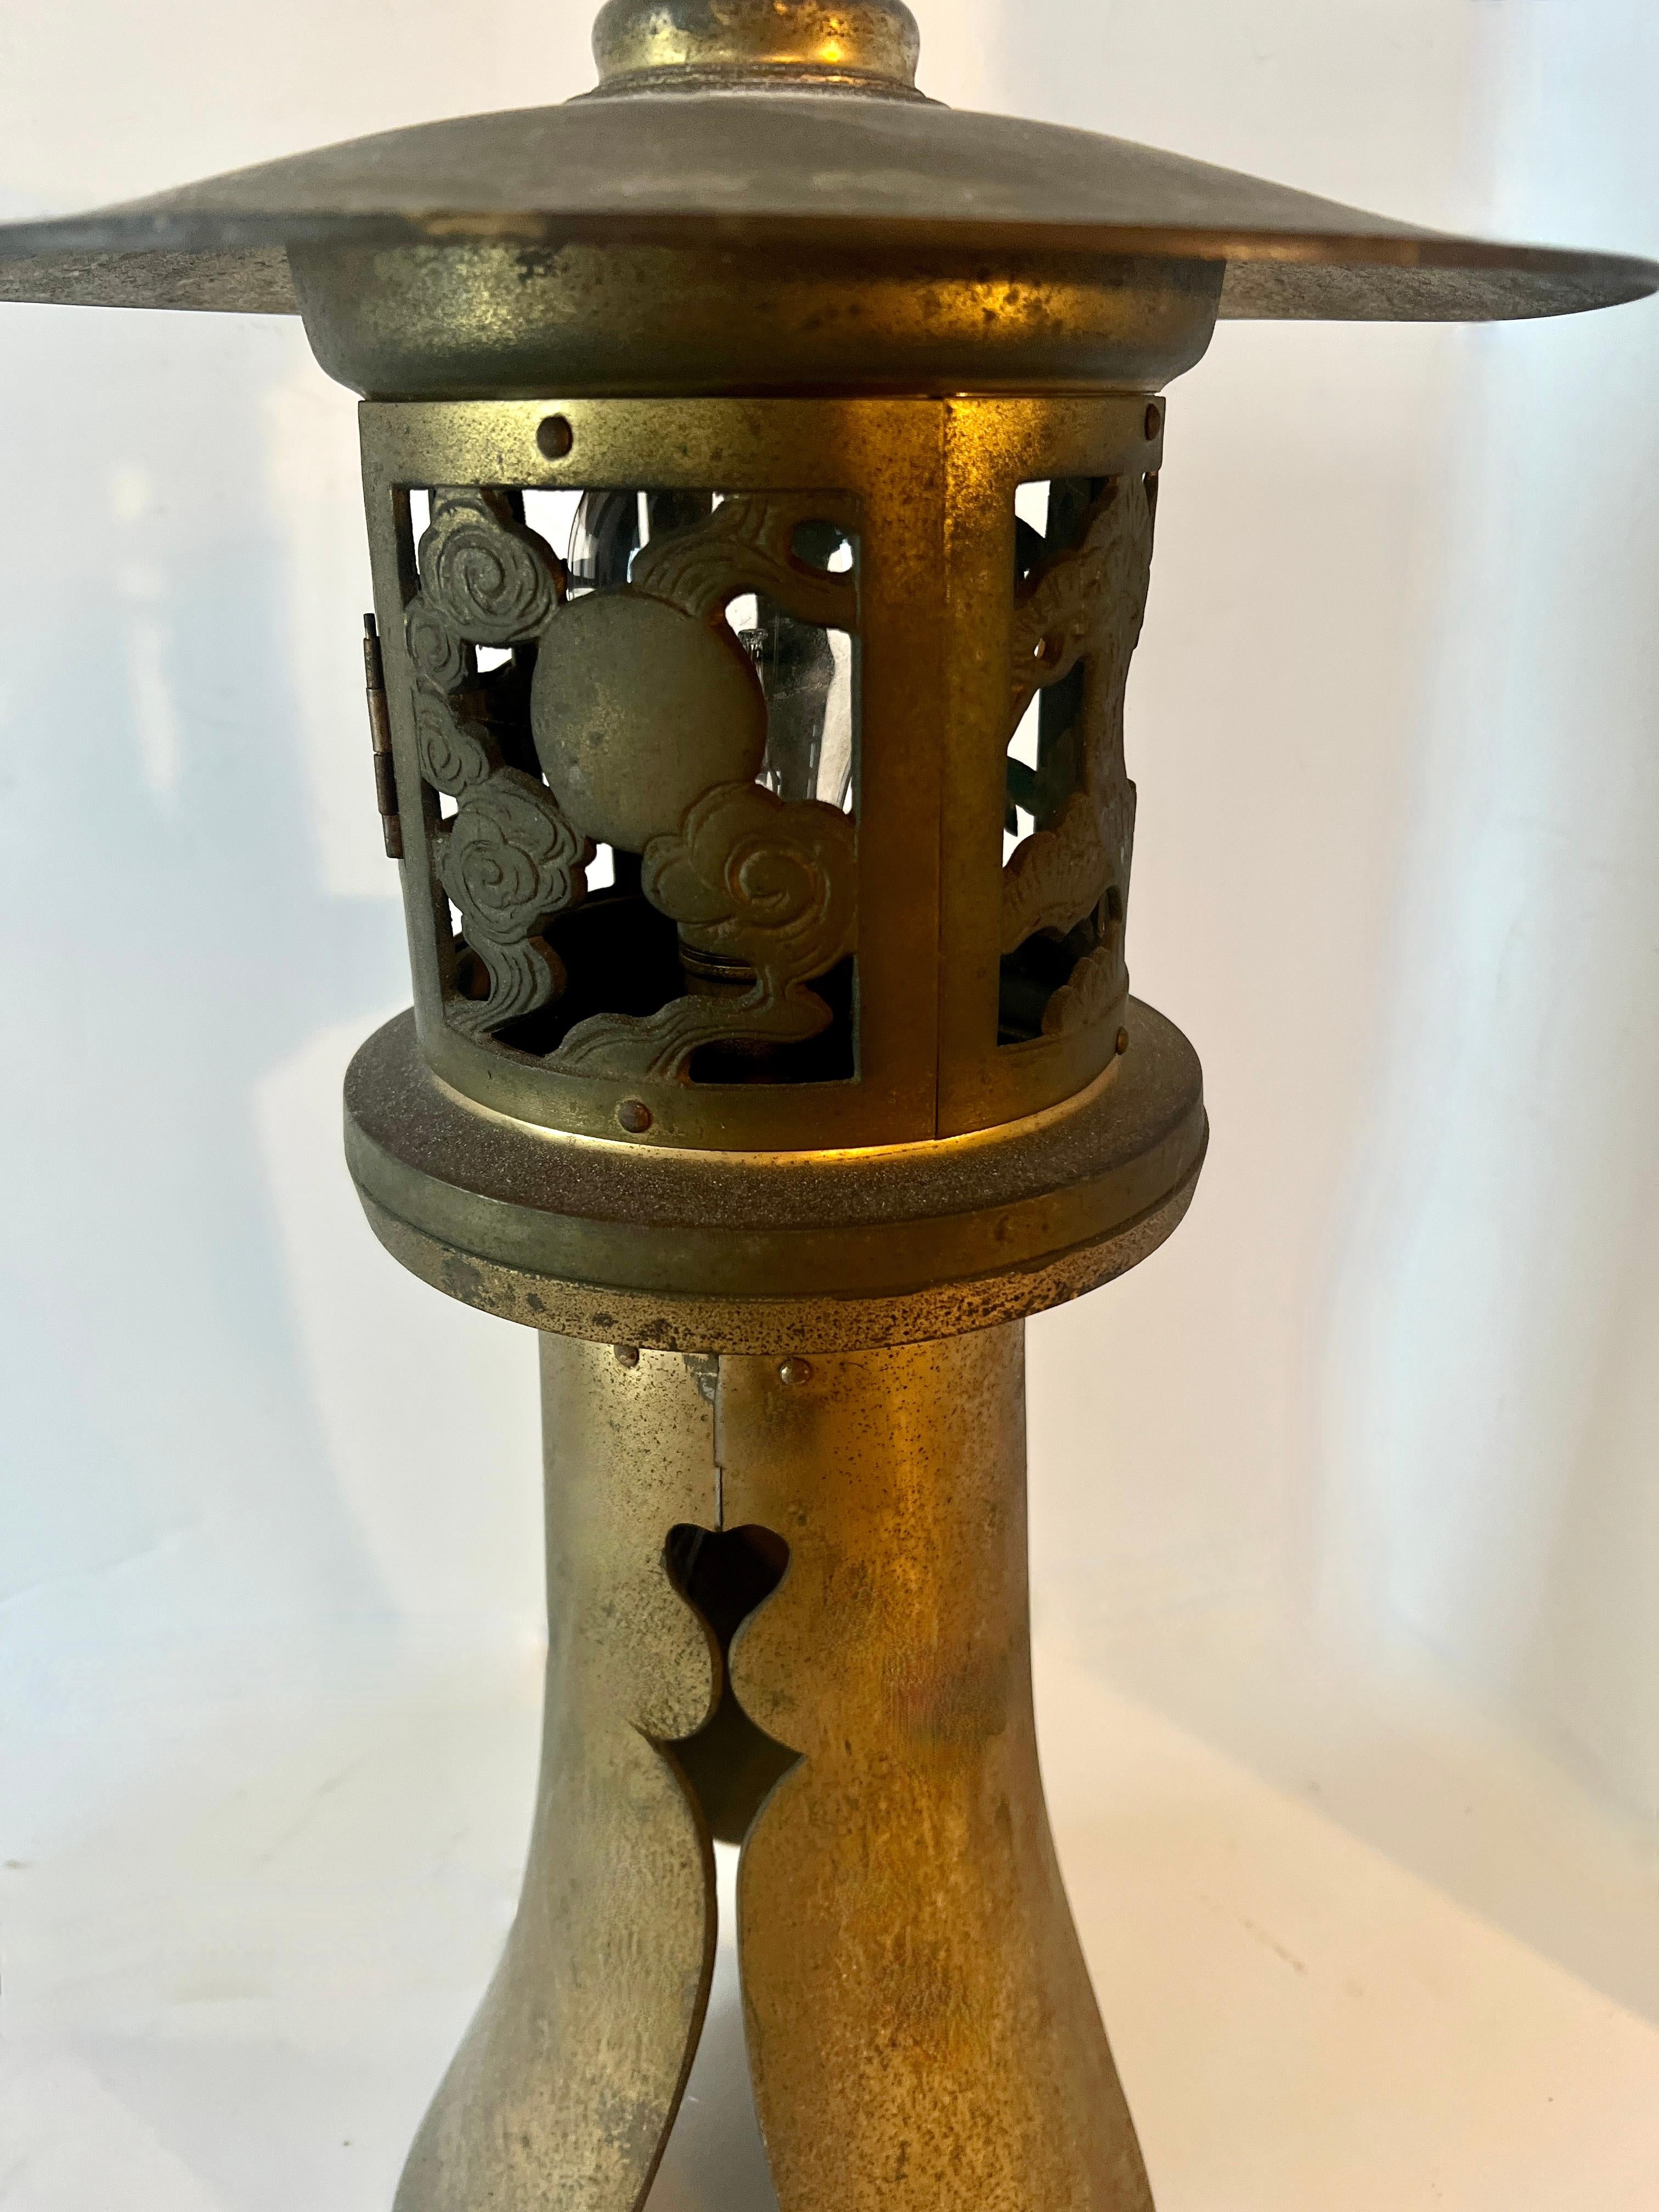 A Pagoda Style Japanese Lantern which is lit with electricity.  The gilt metal framework is well patinated and indicative of older version of a candle lit lantern.

The shape and light that is cast is spectacular.  A compliment to any room either